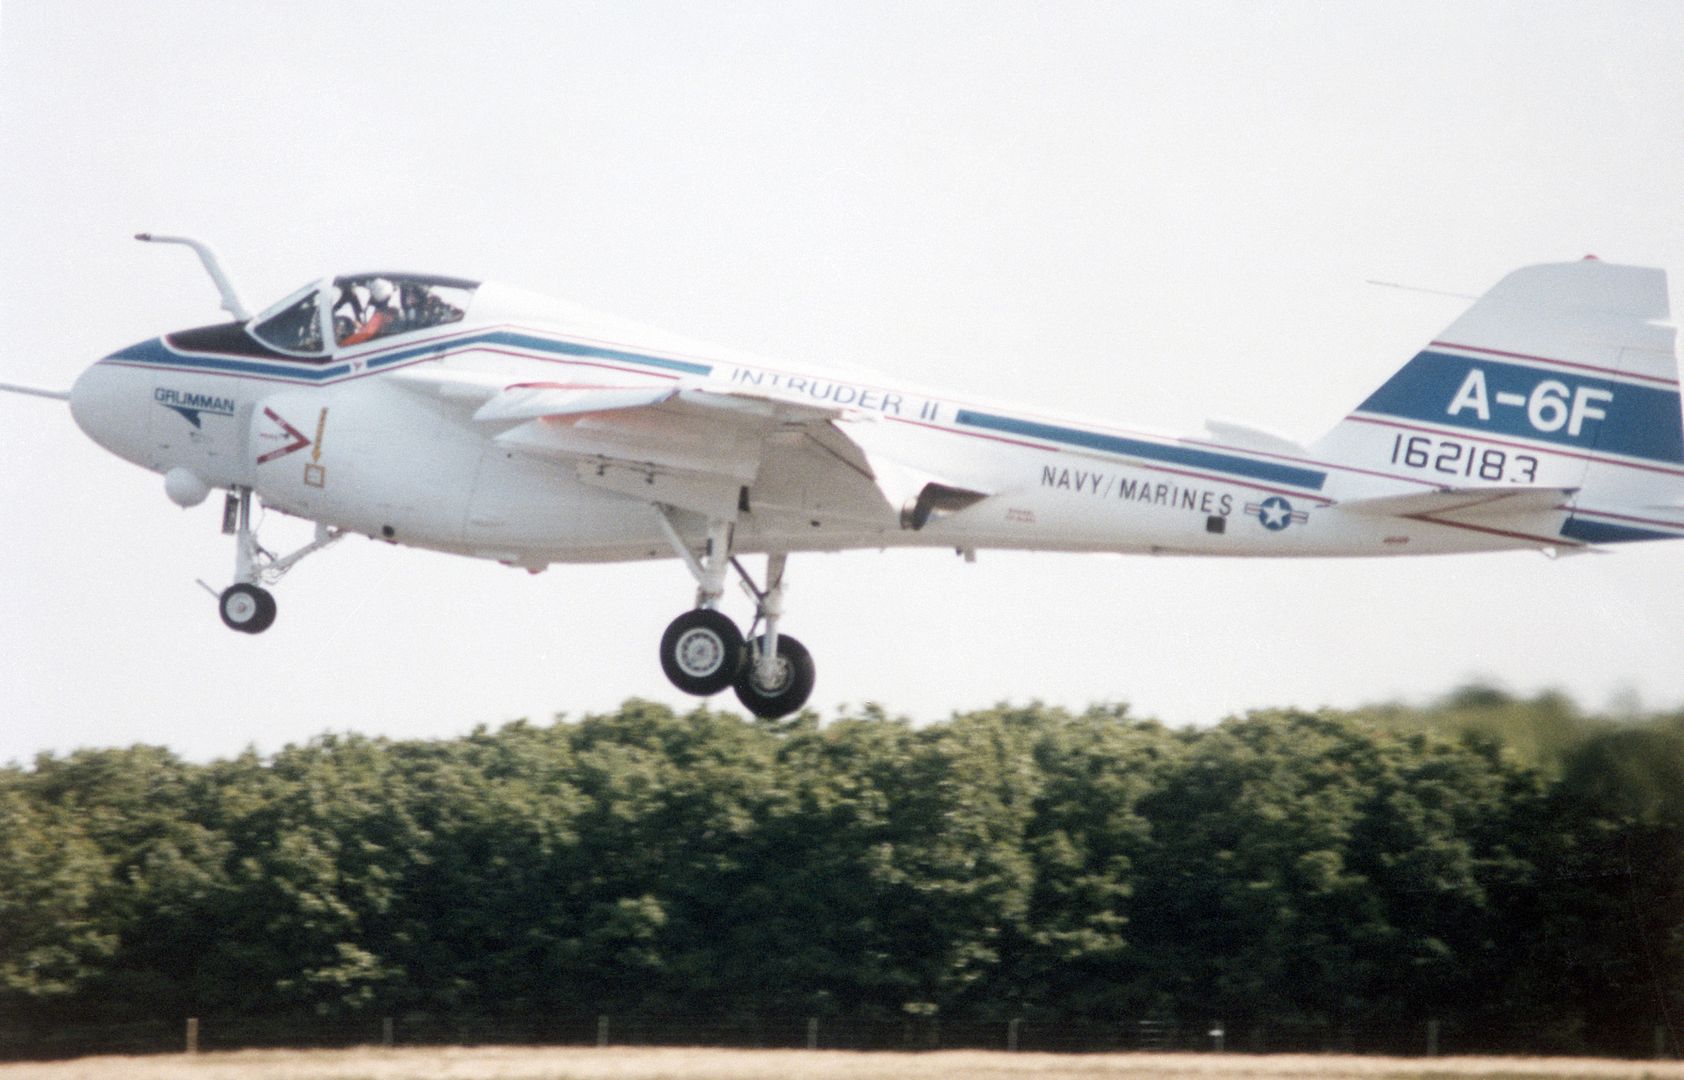 A Left Side View Of The Prototype A 6F Intruder II Aircraft Preparing For A Landing